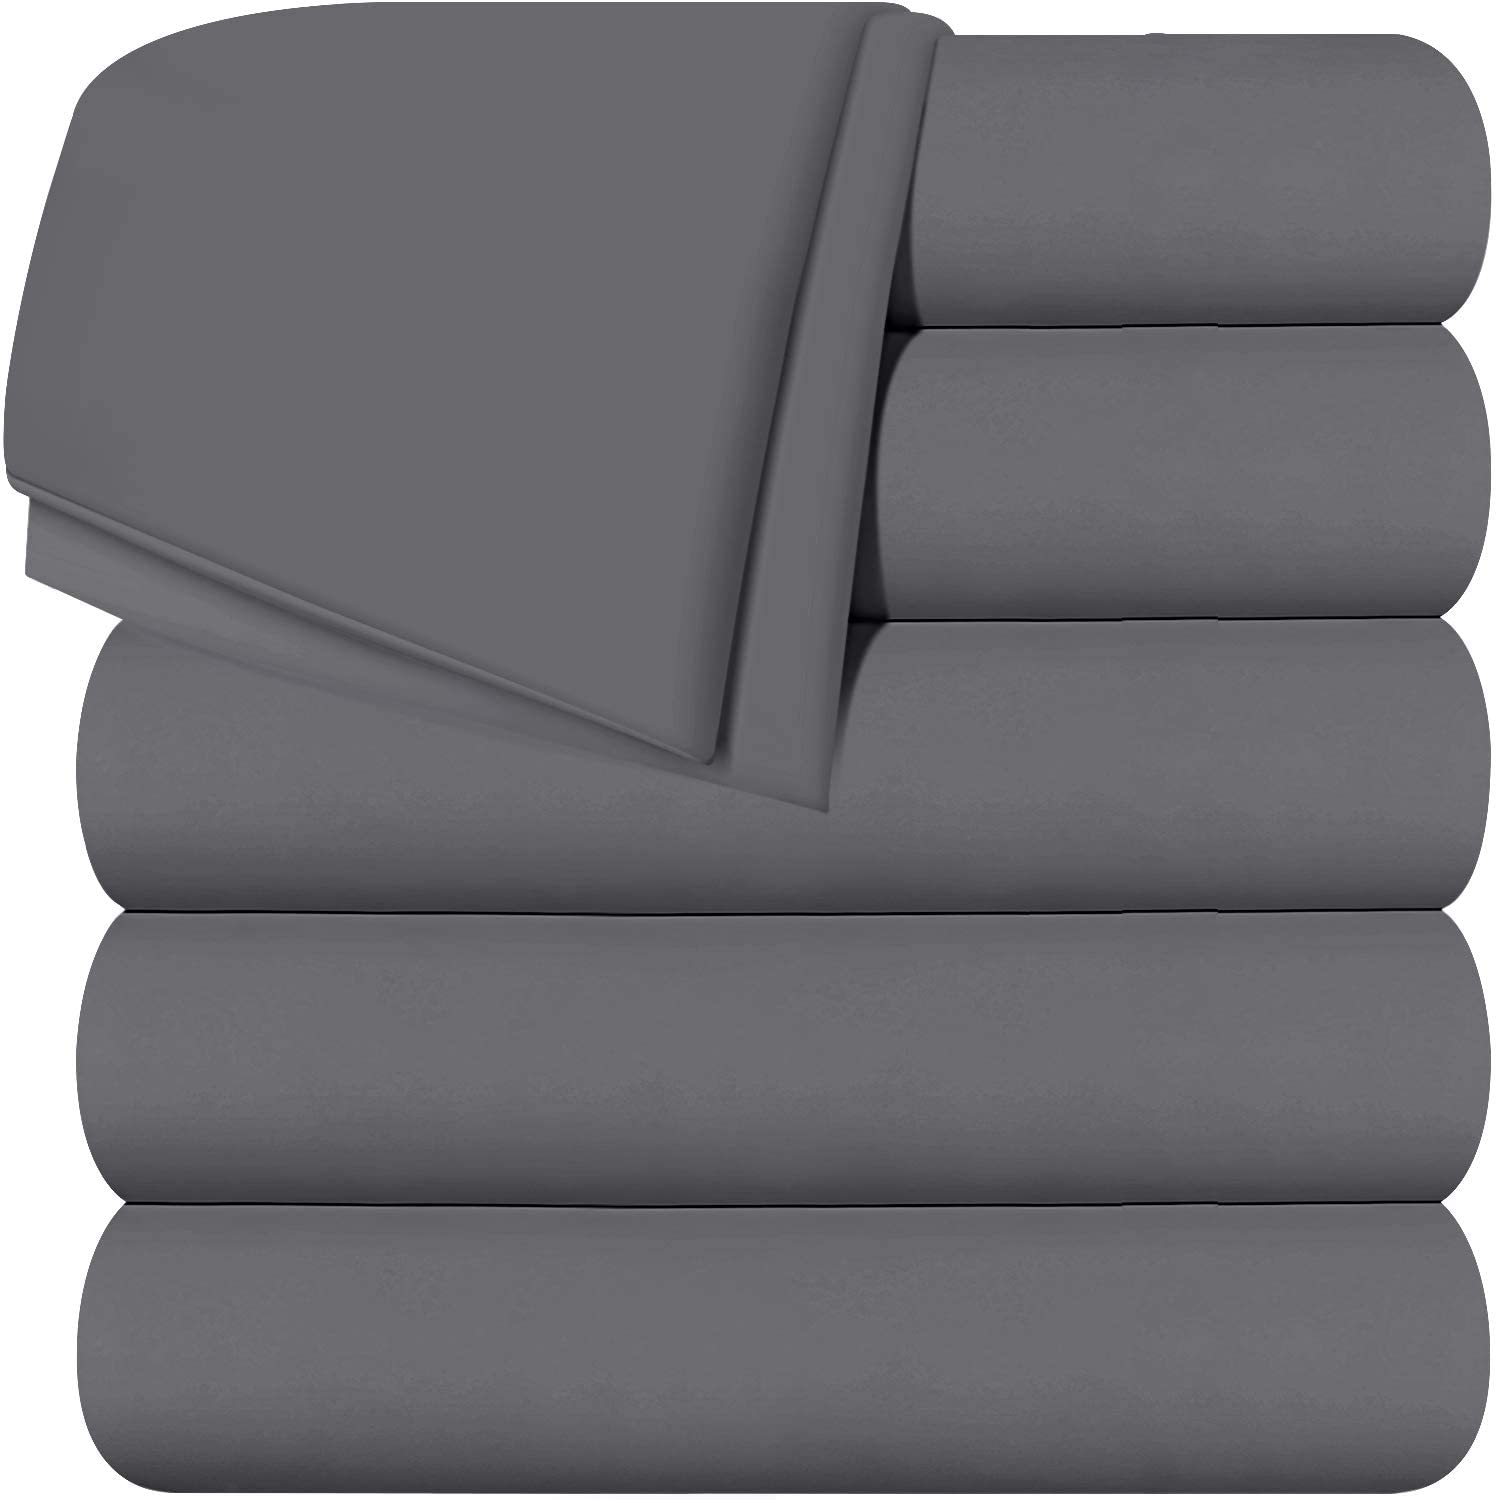 Utopia Bedding Bed Sheet Set - 4 Piece Queen Bedding - Soft Brushed  Microfiber Fabric - Shrinkage & Fade Resistant - Easy Care (Queen, Grey) :  : Home